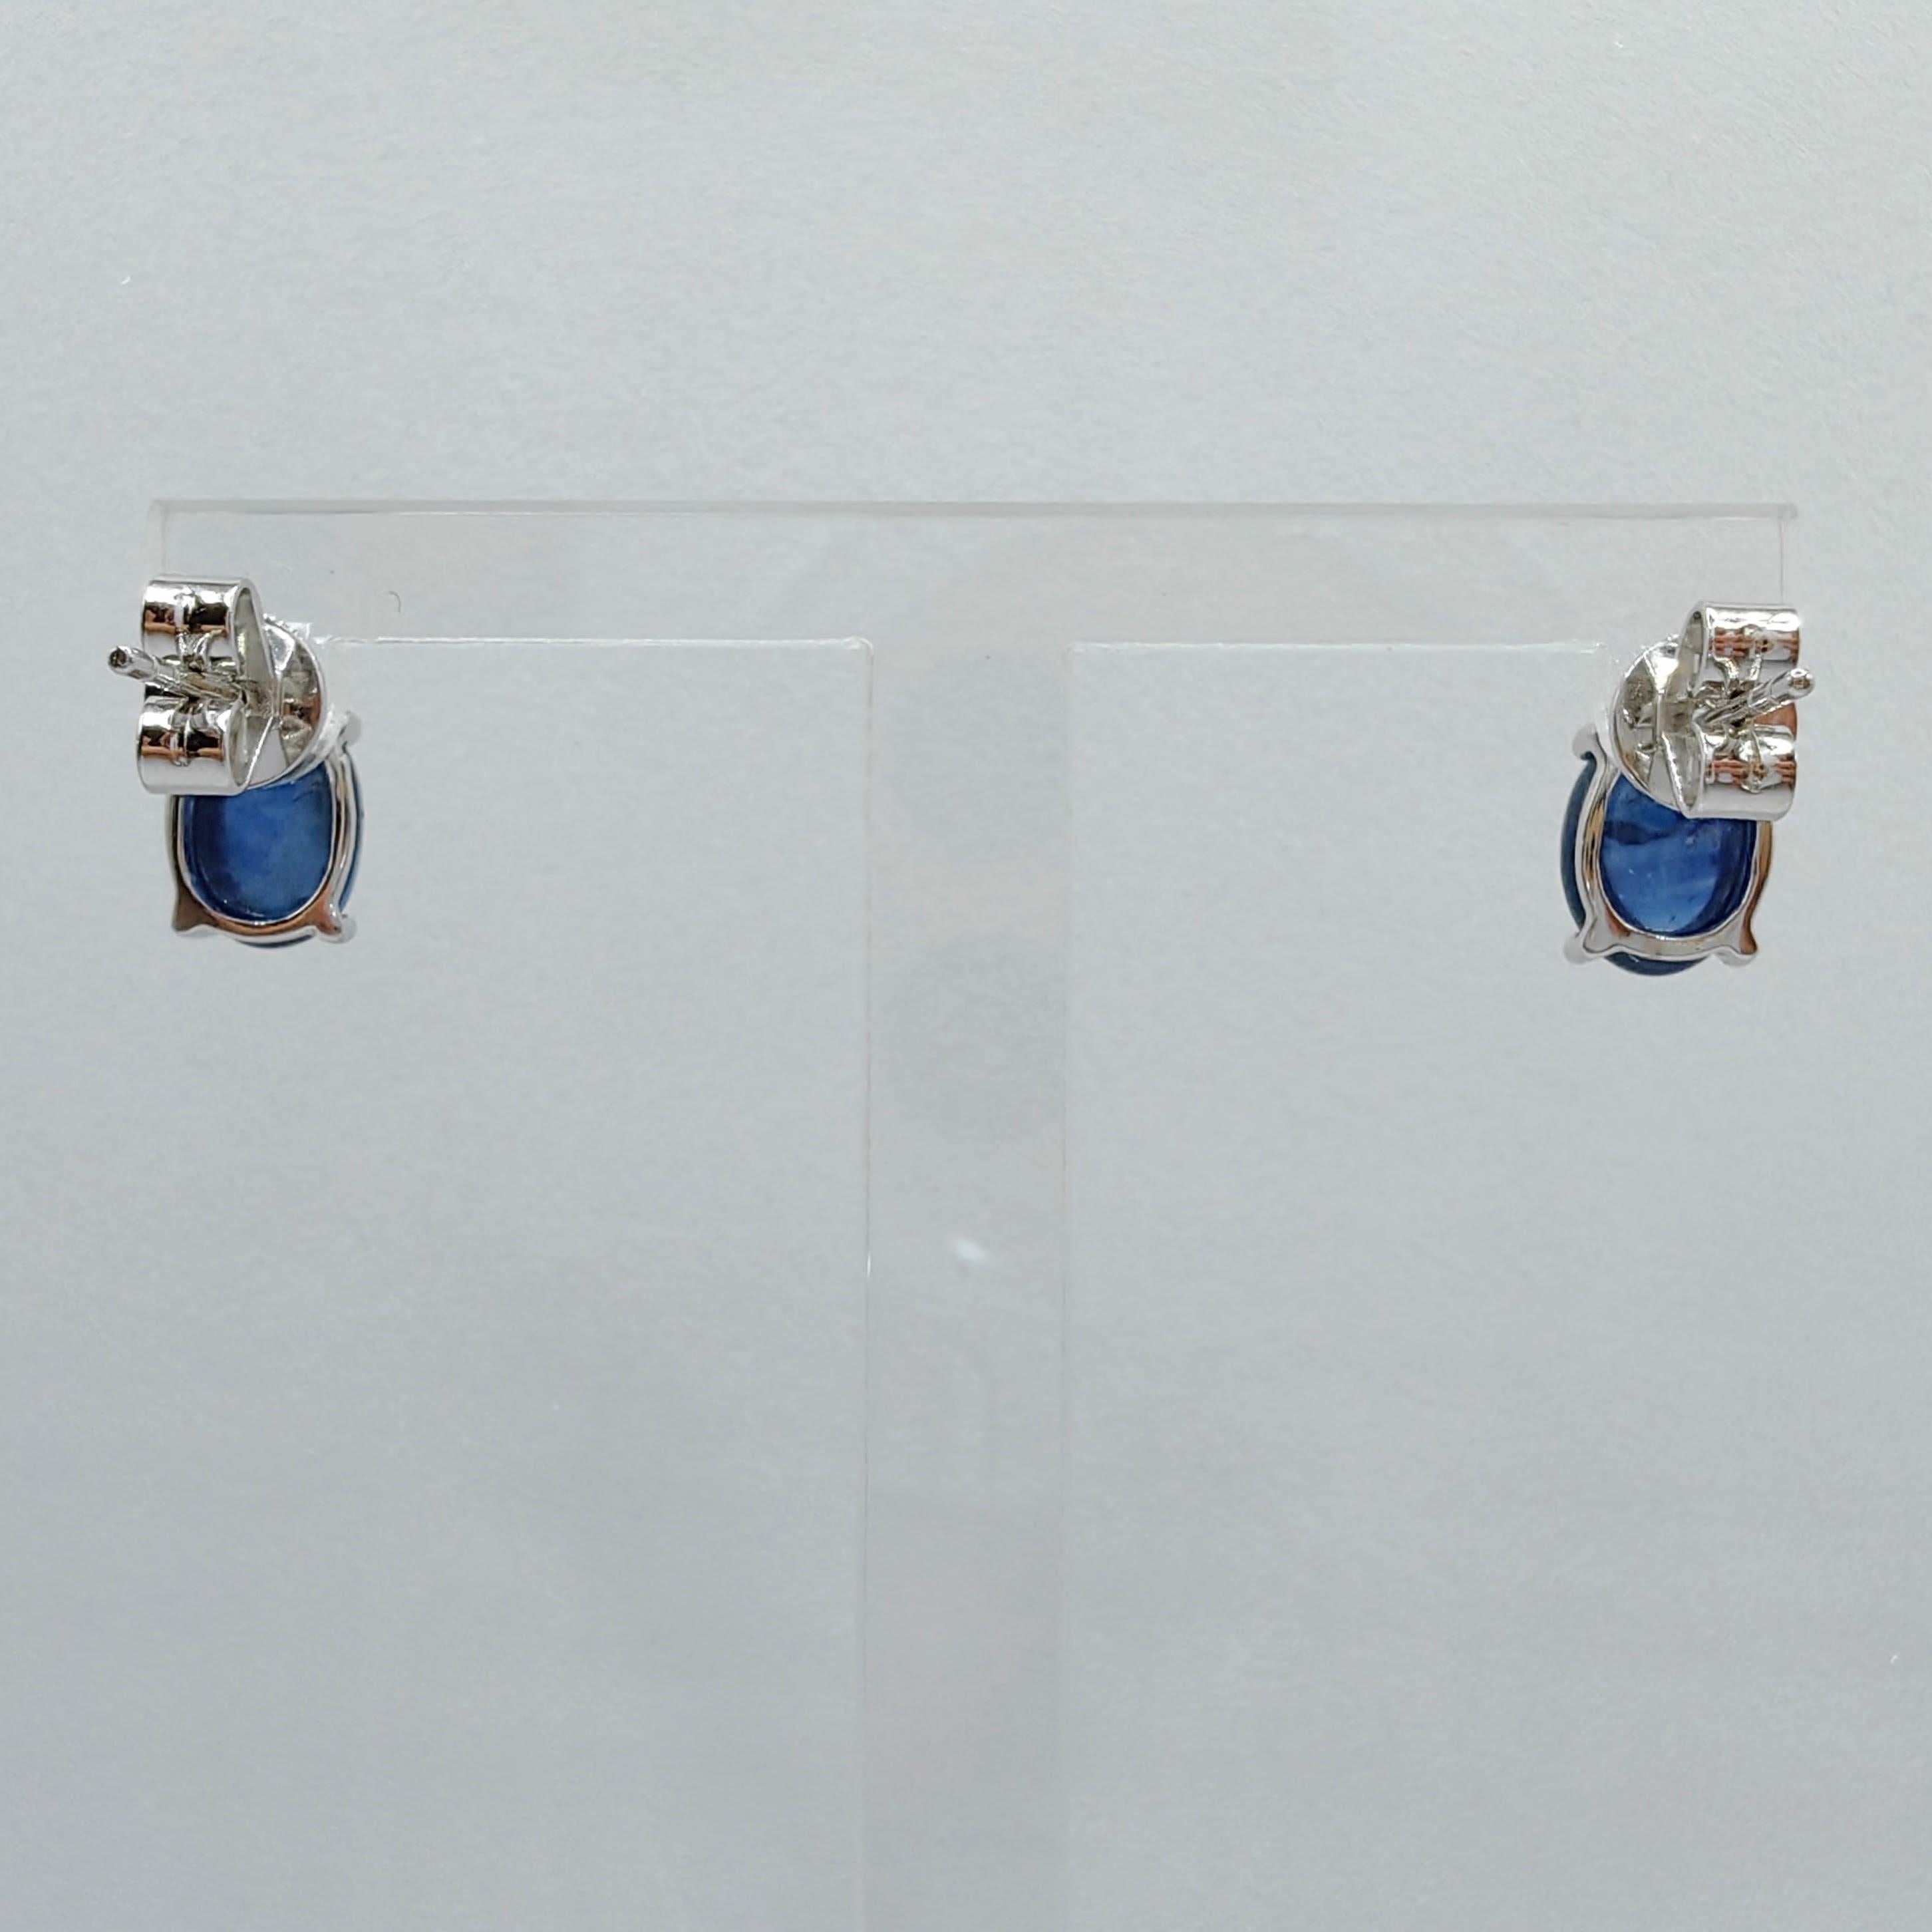 Matched 4.67 Carat 8x6mm Cabochon Blue Sapphire Stud Earrings in 18K White Gold For Sale 3